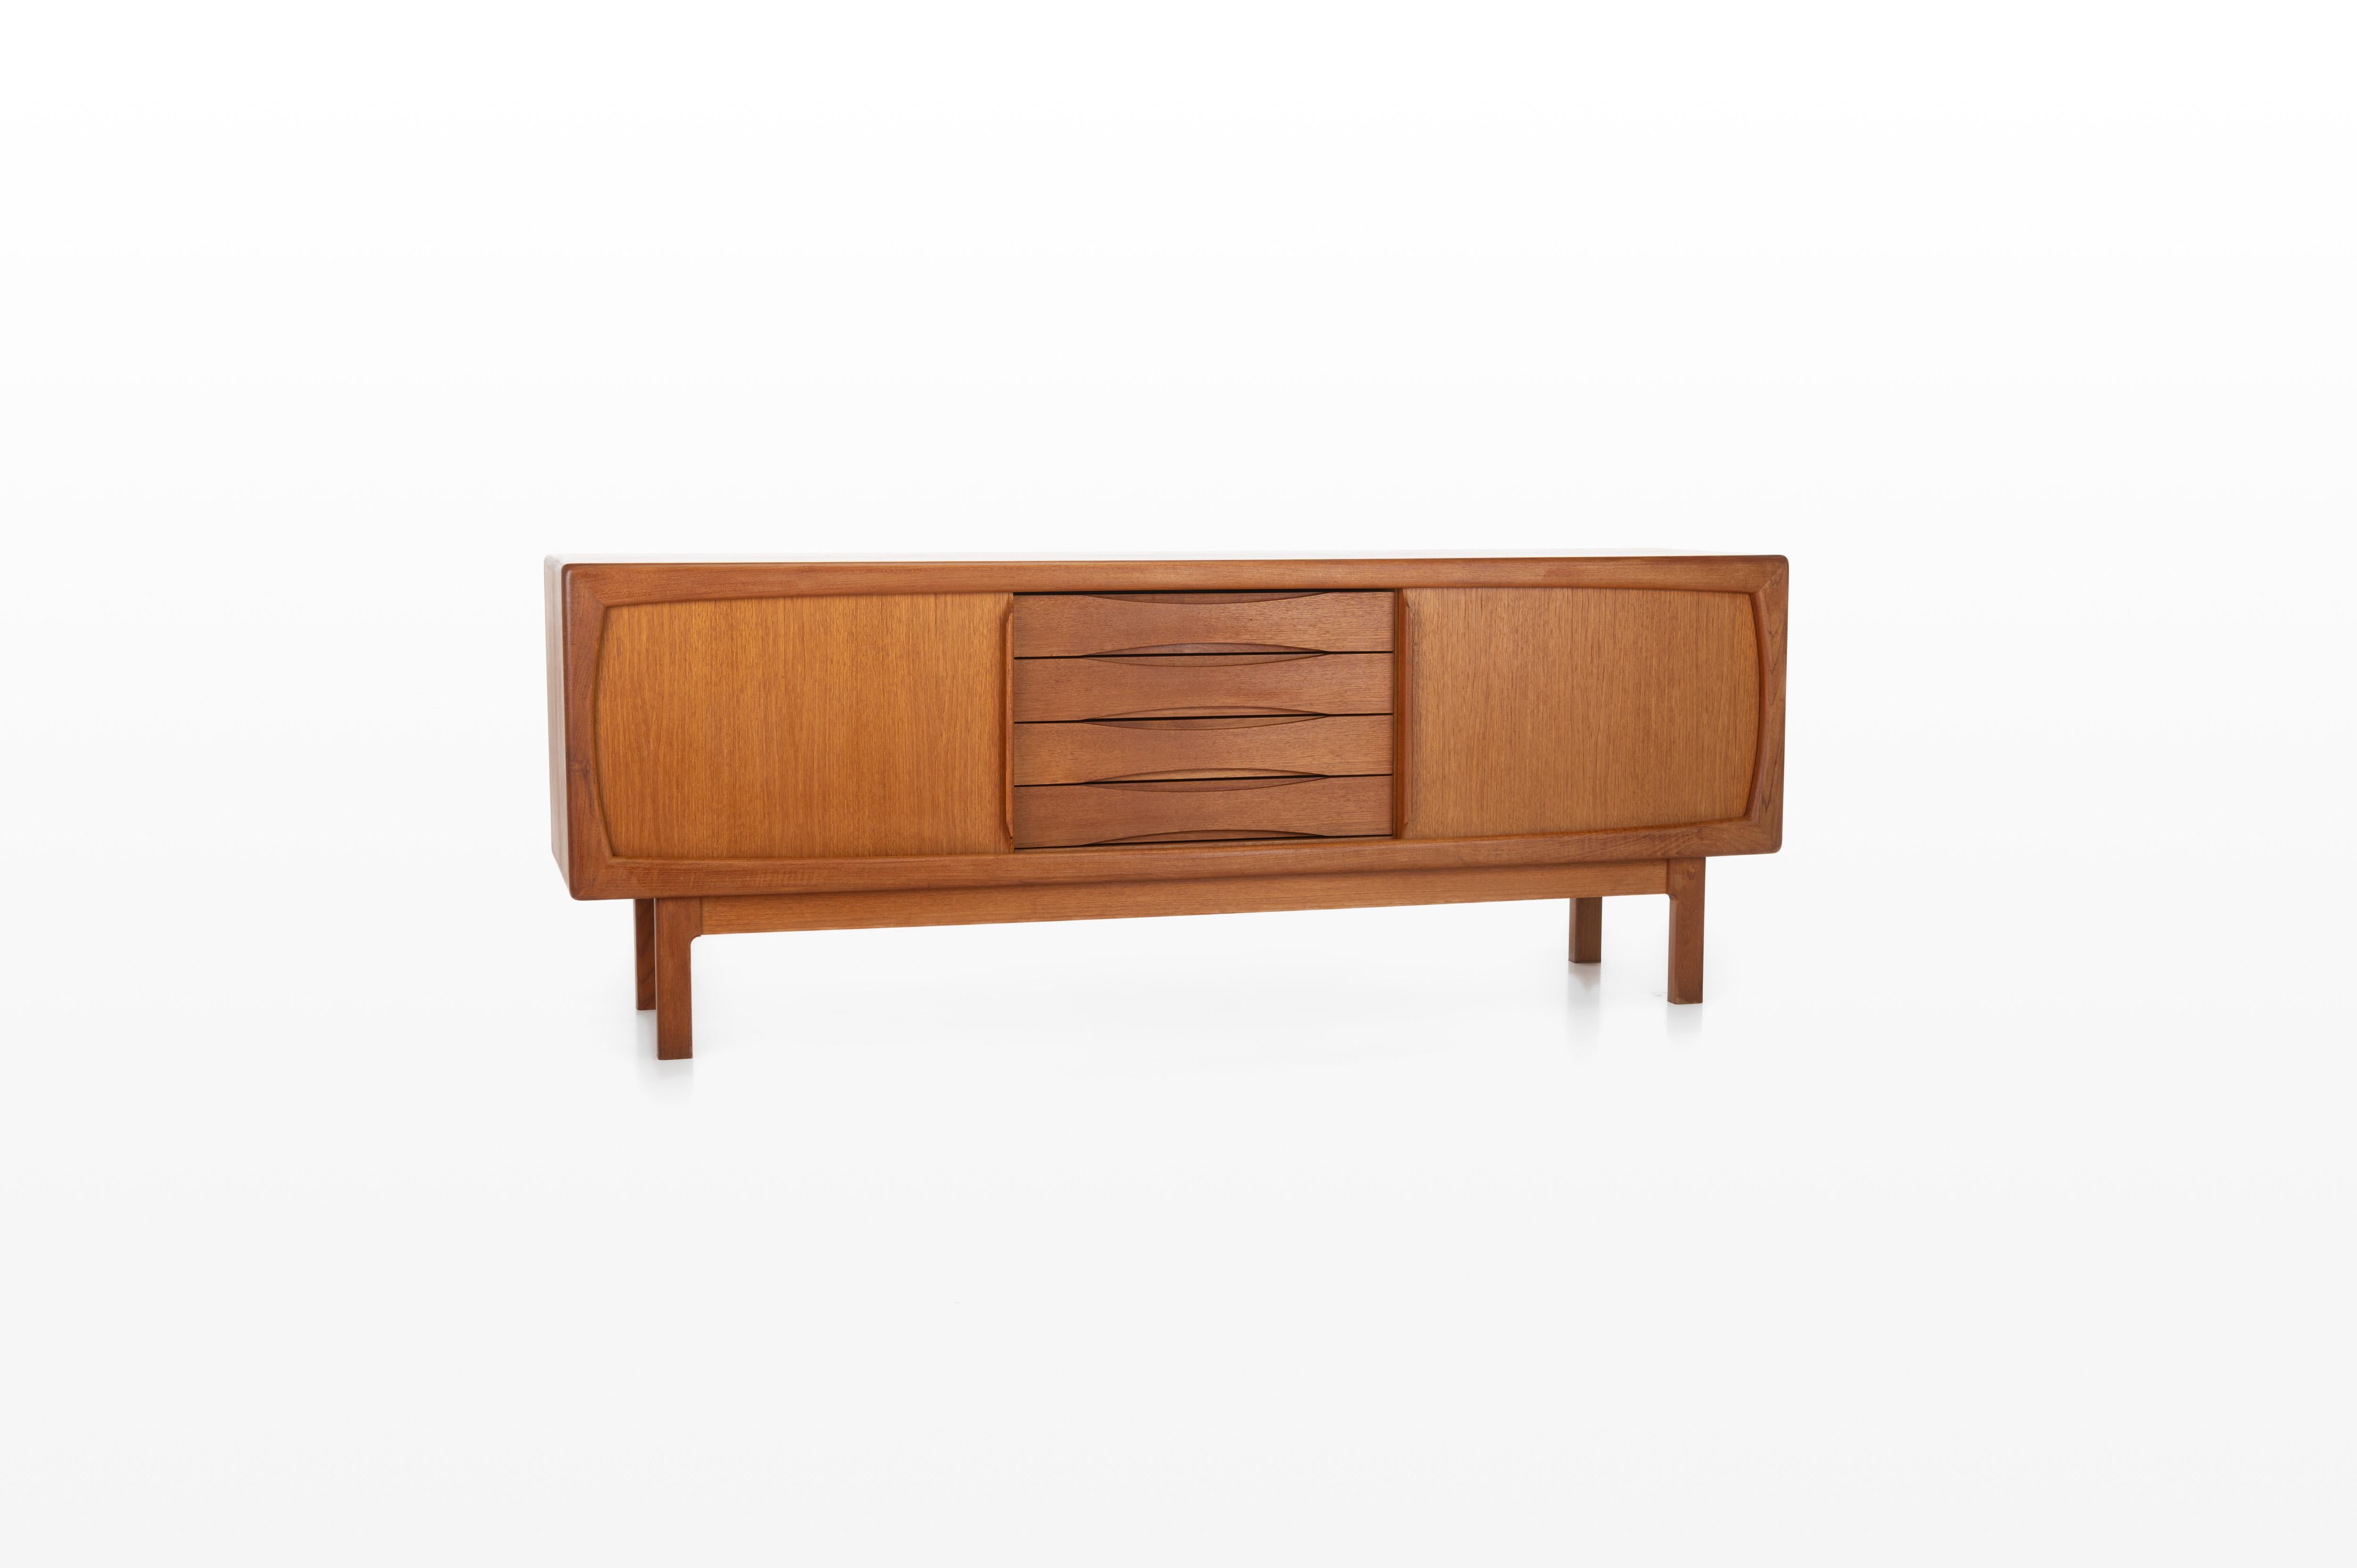 This Scandinavian vintage sideboard in teak is manufactured by Dyrlund in Denmark. It has two sliding doors, four drawers and remains in very good condition.

Dimensions:
W: 199 cm
D: 49,5 cm
H: 75 cm